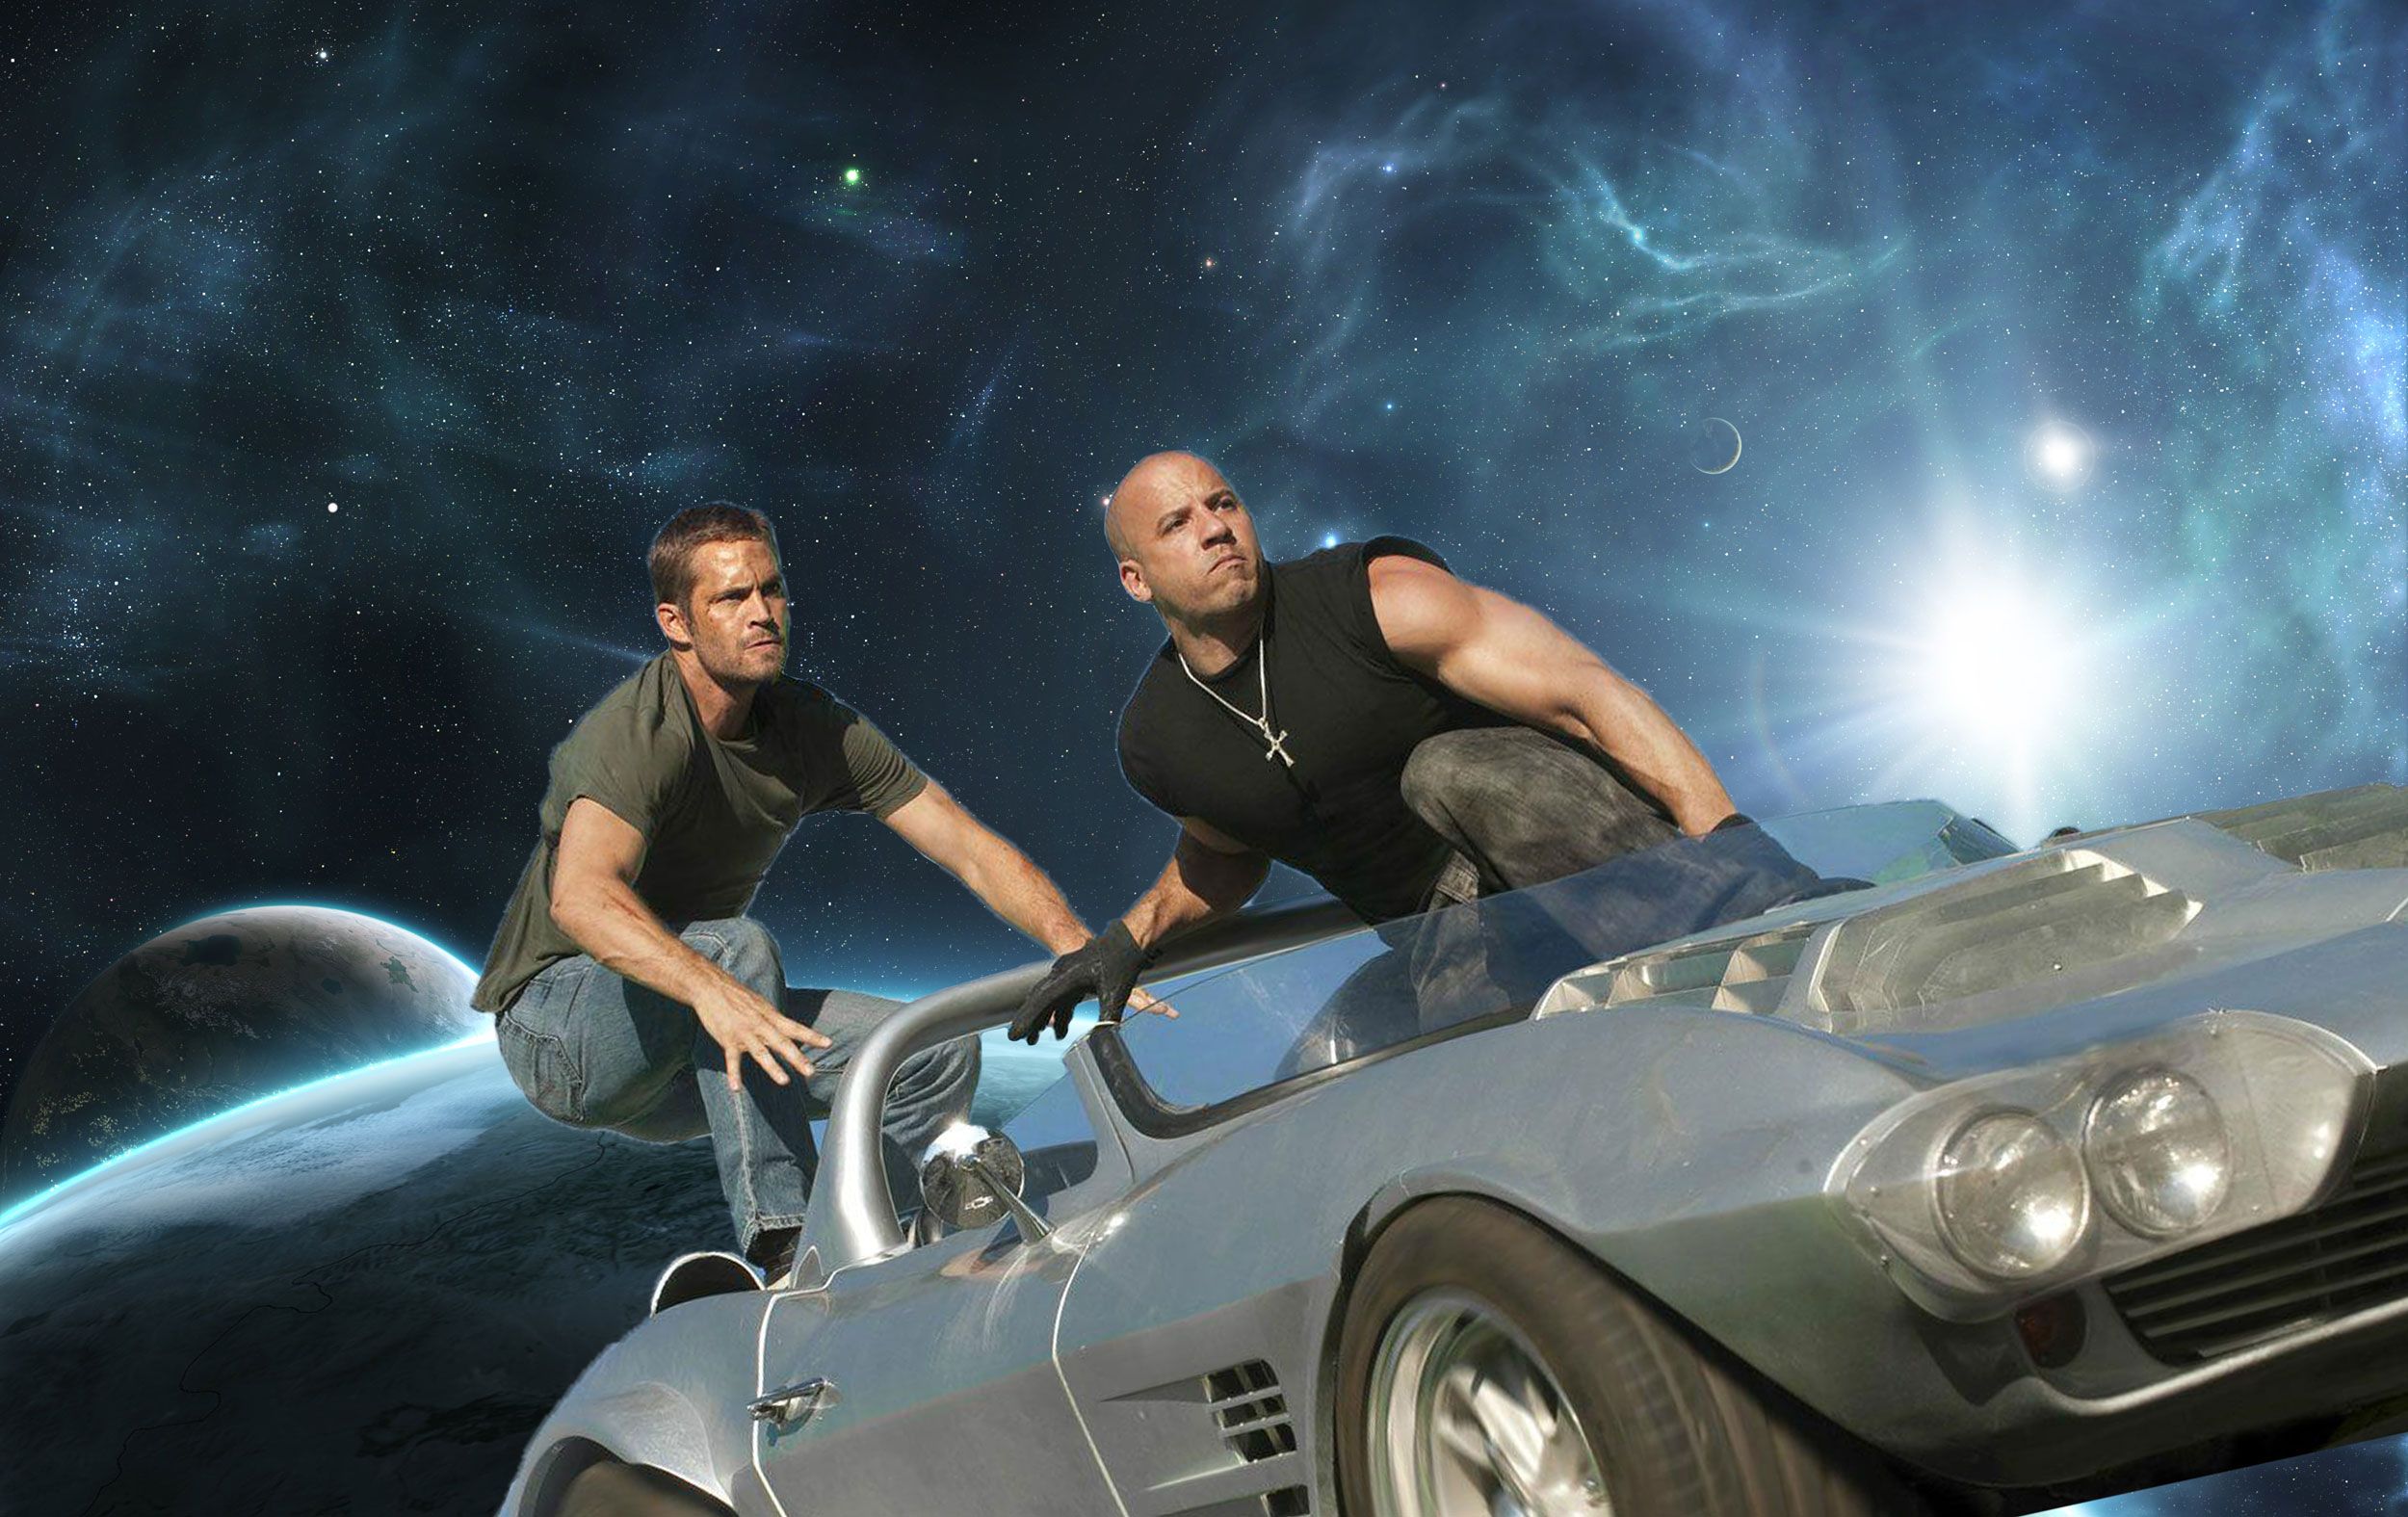 My jaw was on the ground': Vin Diesel on 'Fast & Furious 9' taking flight  to space - The Economic Times